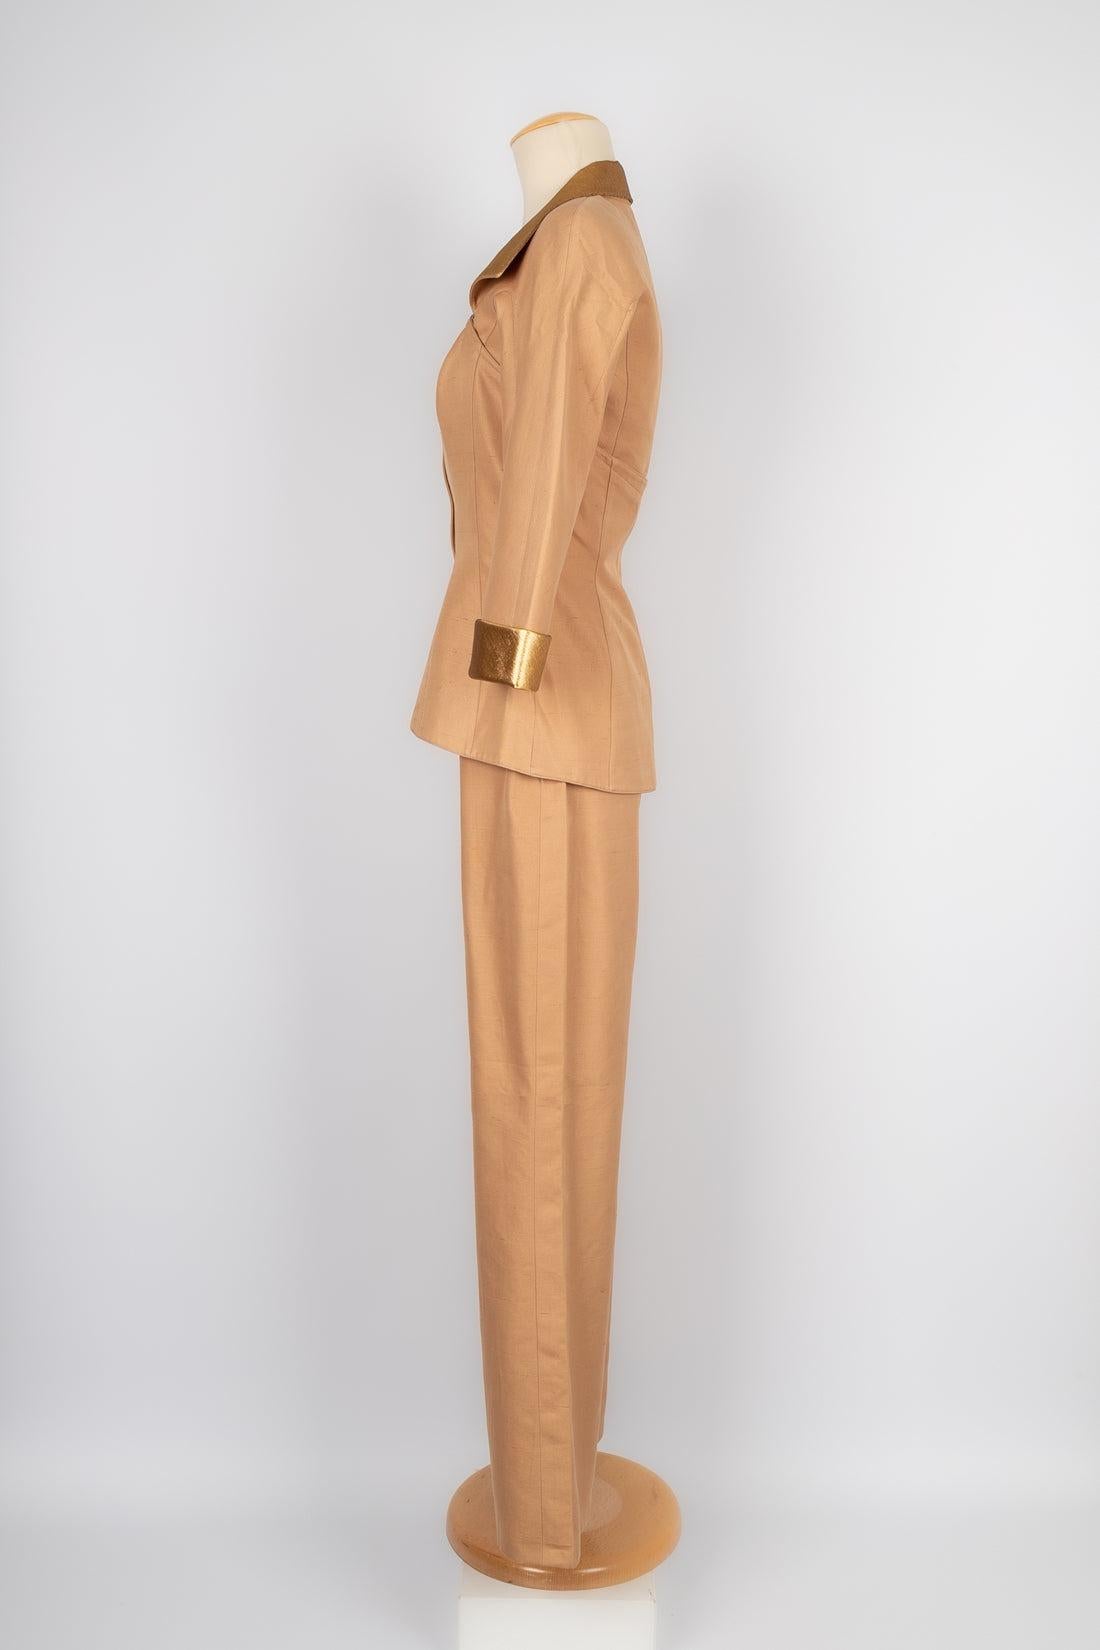 Thierry Mugler - (Made in France) Light-brown wild silk set composed of pants and a jacket with golden lamé edges. Size 38FR.

Additional information:
Condition: Very good condition
Dimensions: Jacket: Shoulder width: 39 cm - Sleeve length: 39 cm -